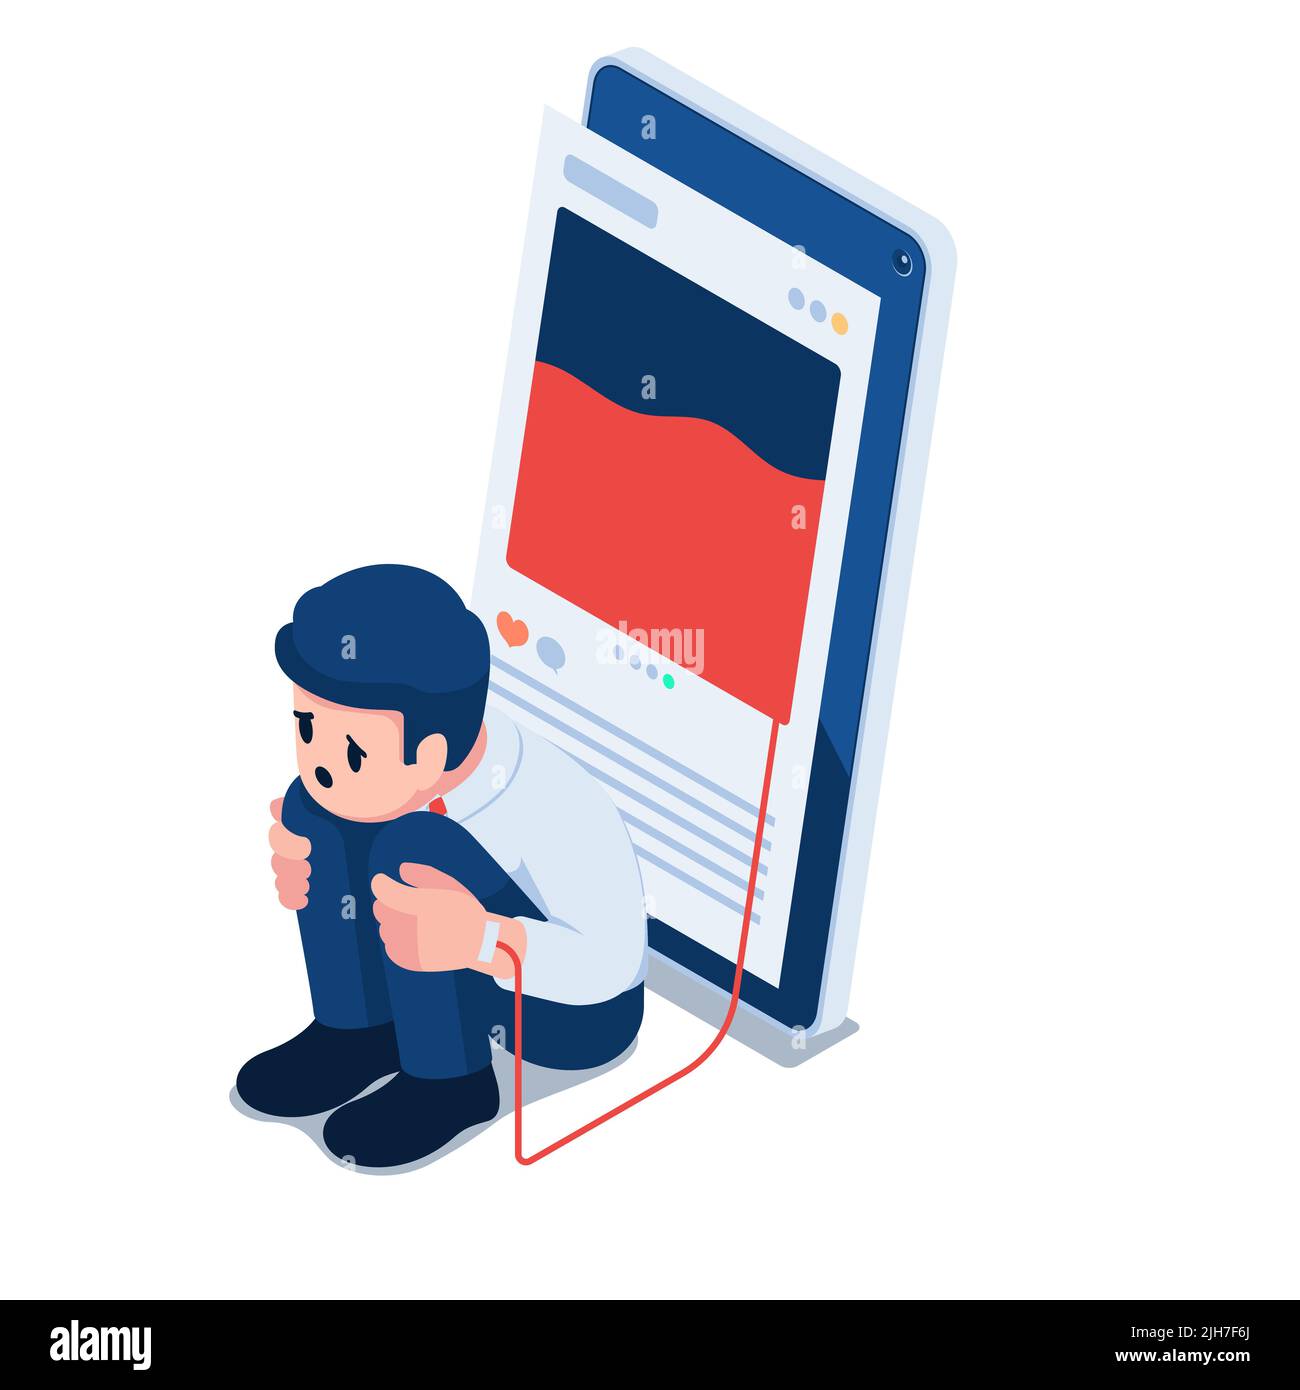 Flat 3d Isometric Man Injecting Social Media into The Arm. Social Media or Internet Addiction Concept. Stock Vector